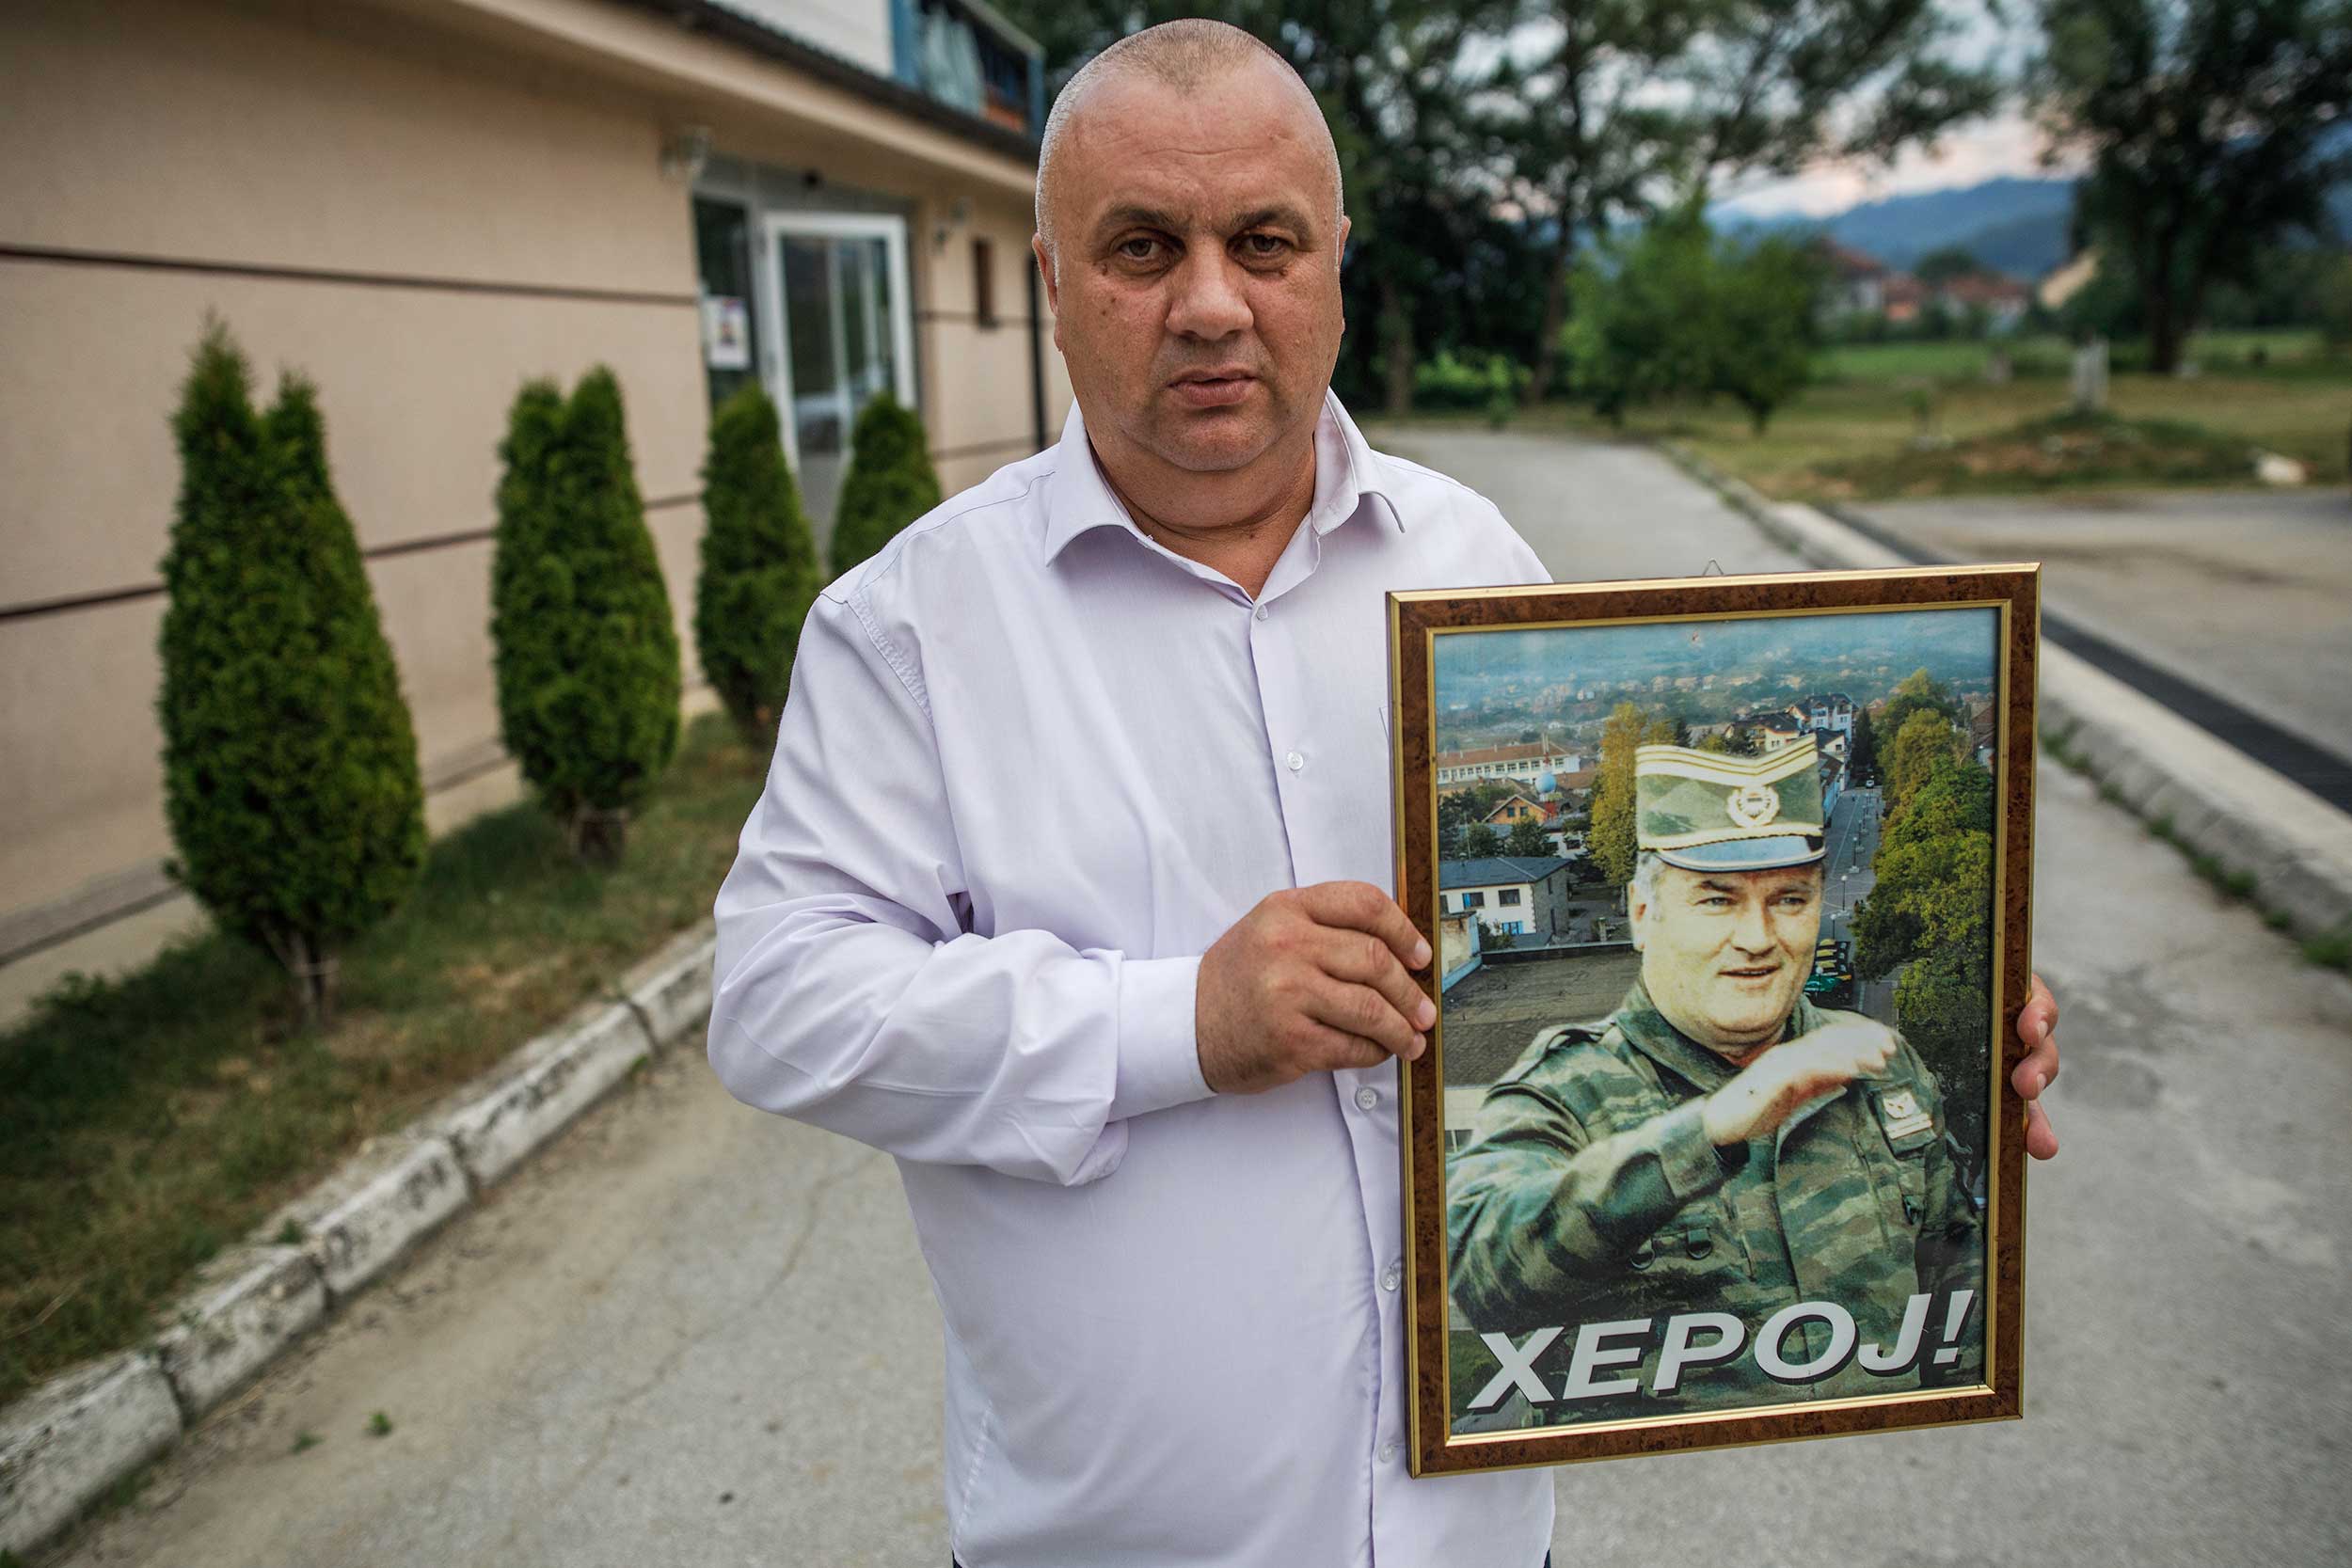 Vojin Pavlovic, an organiser of the "Srebrenica liberation day" event poses with a photo of Bosnian Serb war time military leader and convicted war criminal Ratko Mladic with a word "hero" written on it on July 11, 2020 in Bratunac, near Srebrenica, Bosnia and Herzegovina. As the 25th anniversary of Srebrenica genocide, in which over 8,000 Bosnian Muslim men and boys were killed by Serb forces is marked. © Damir Sagolj/Getty Images